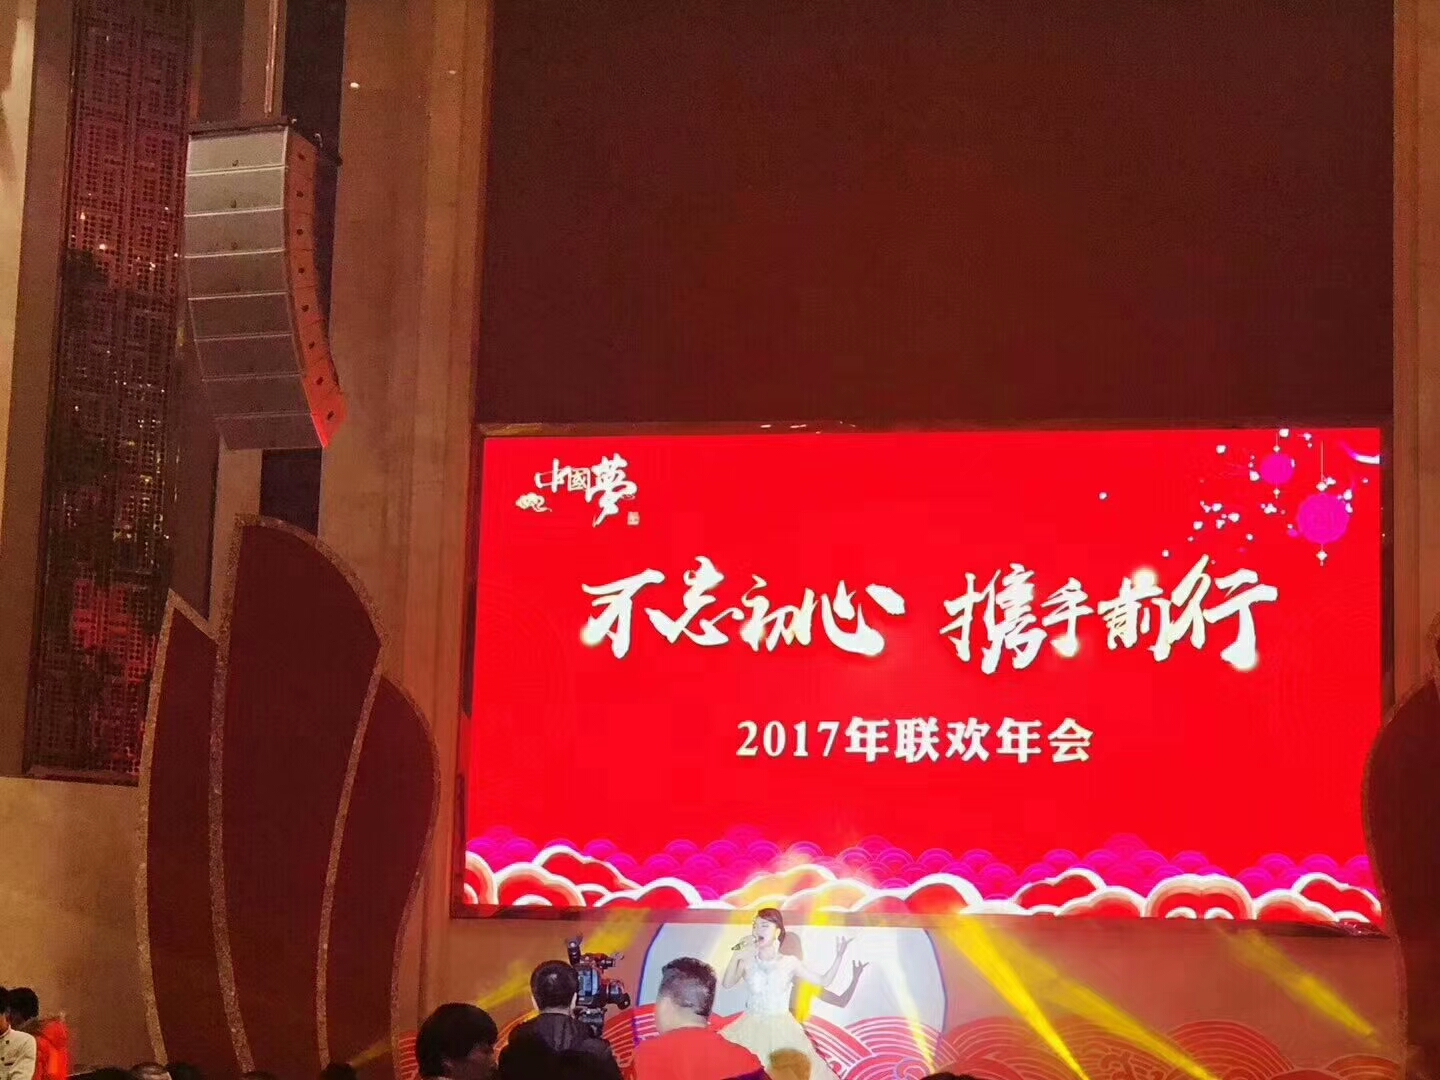 Save Equipment organized a wonderful gala dinner for the employees, customers and friends in Jiayi International Hotel.